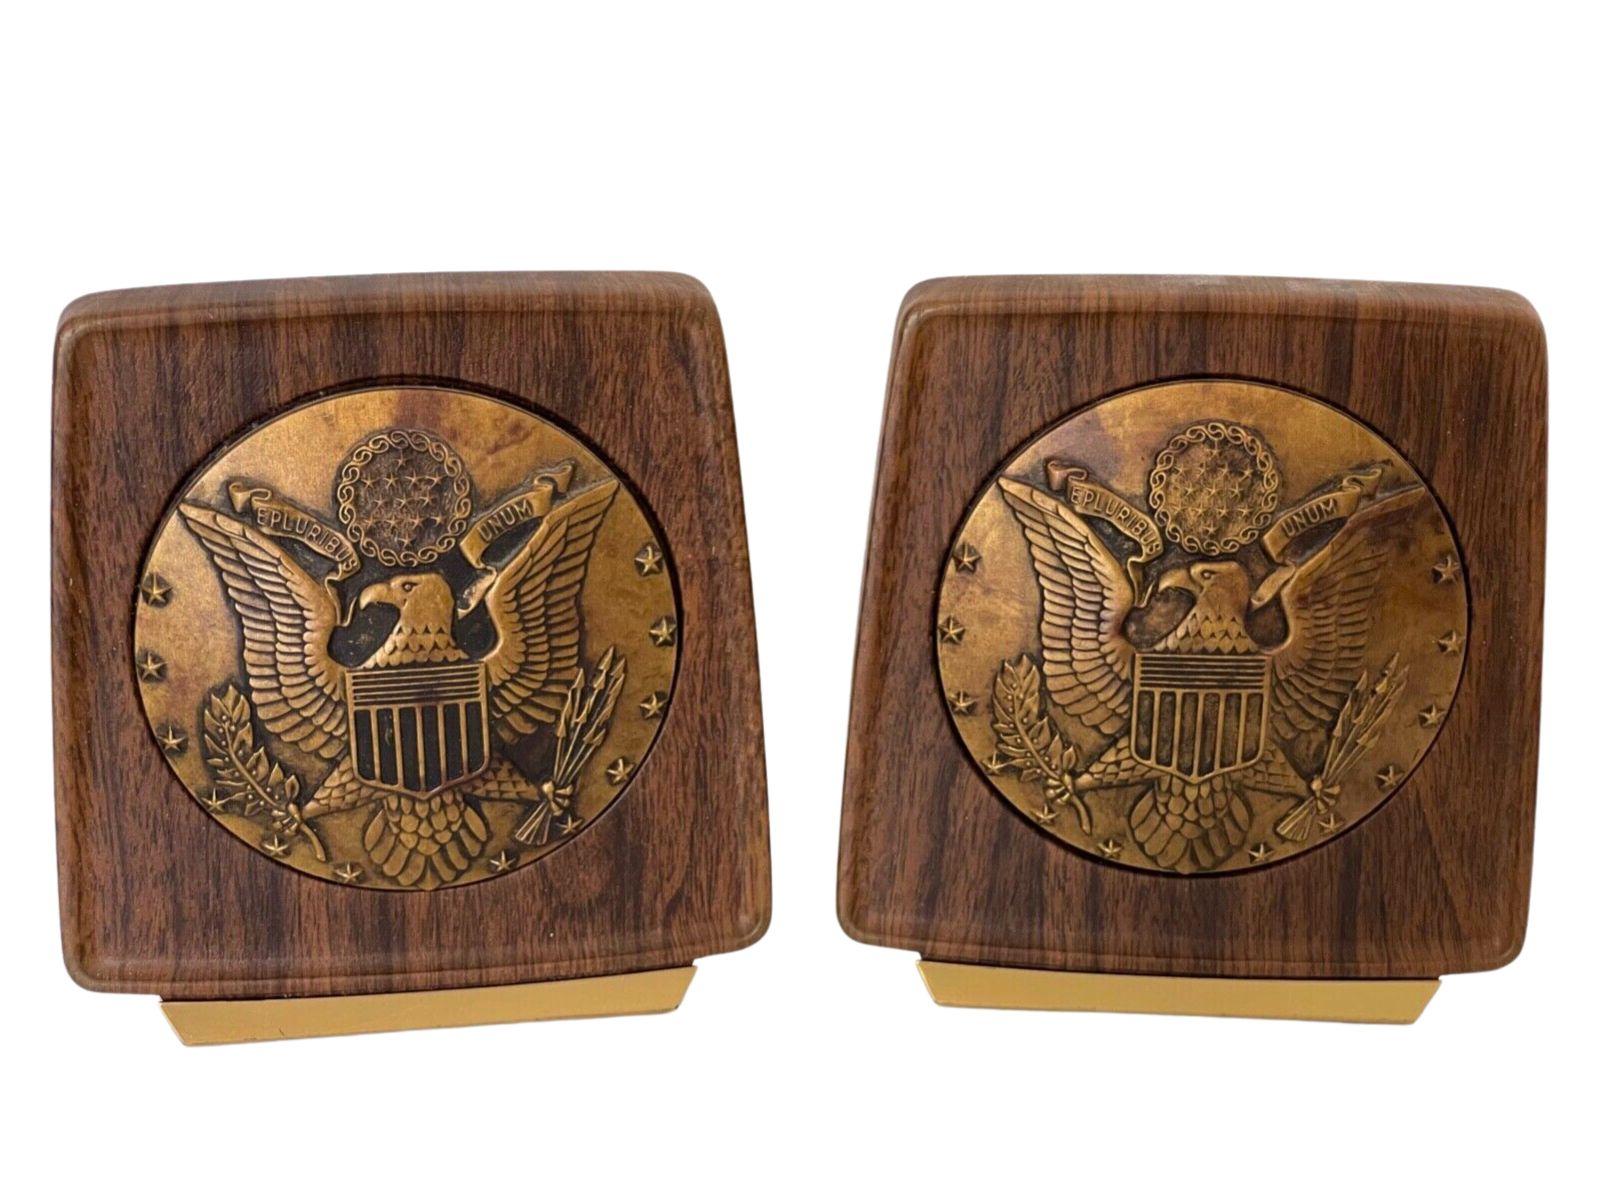 Presented is a pair of vintage U.S. Great Seal brass and wooden bookends. The bookends feature a brass, raised relief U.S. Great Seal at center. The round seal is encased in a rich, walnut-toned wood, with slightly rounded corners and slim brass